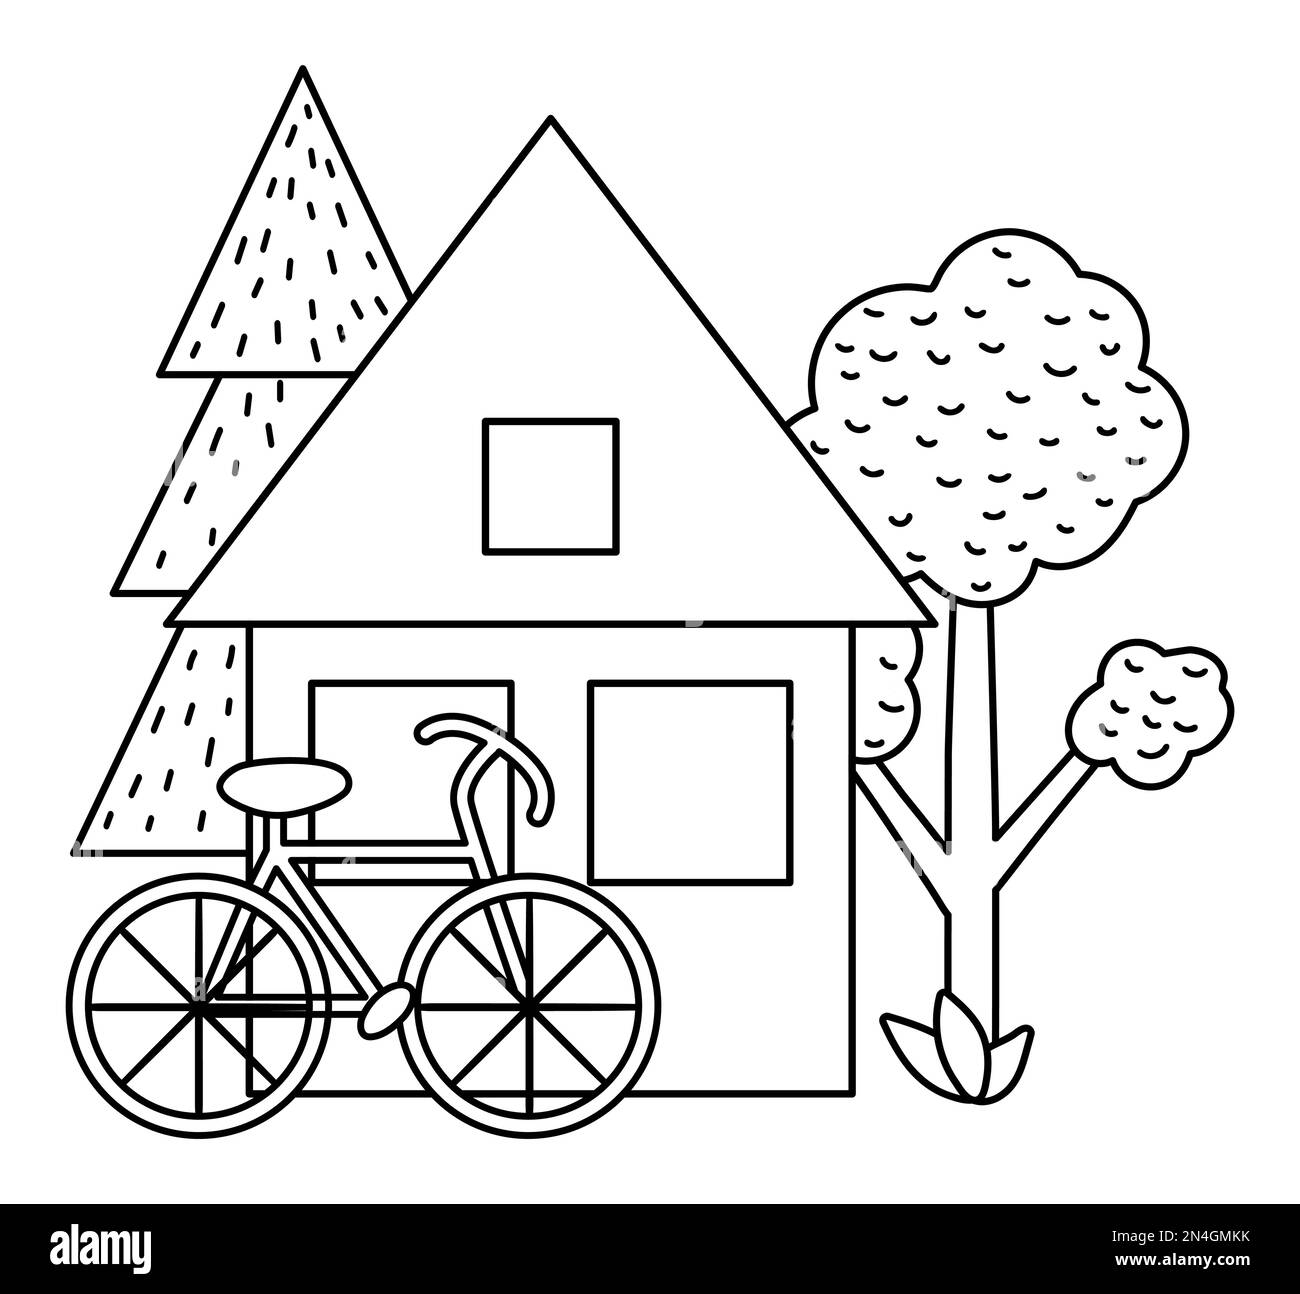 Summer camp black and white scene with house, trees, bicycle. Vector outline campfire illustration. Active holidays or local tourism woodland landscap Stock Vector